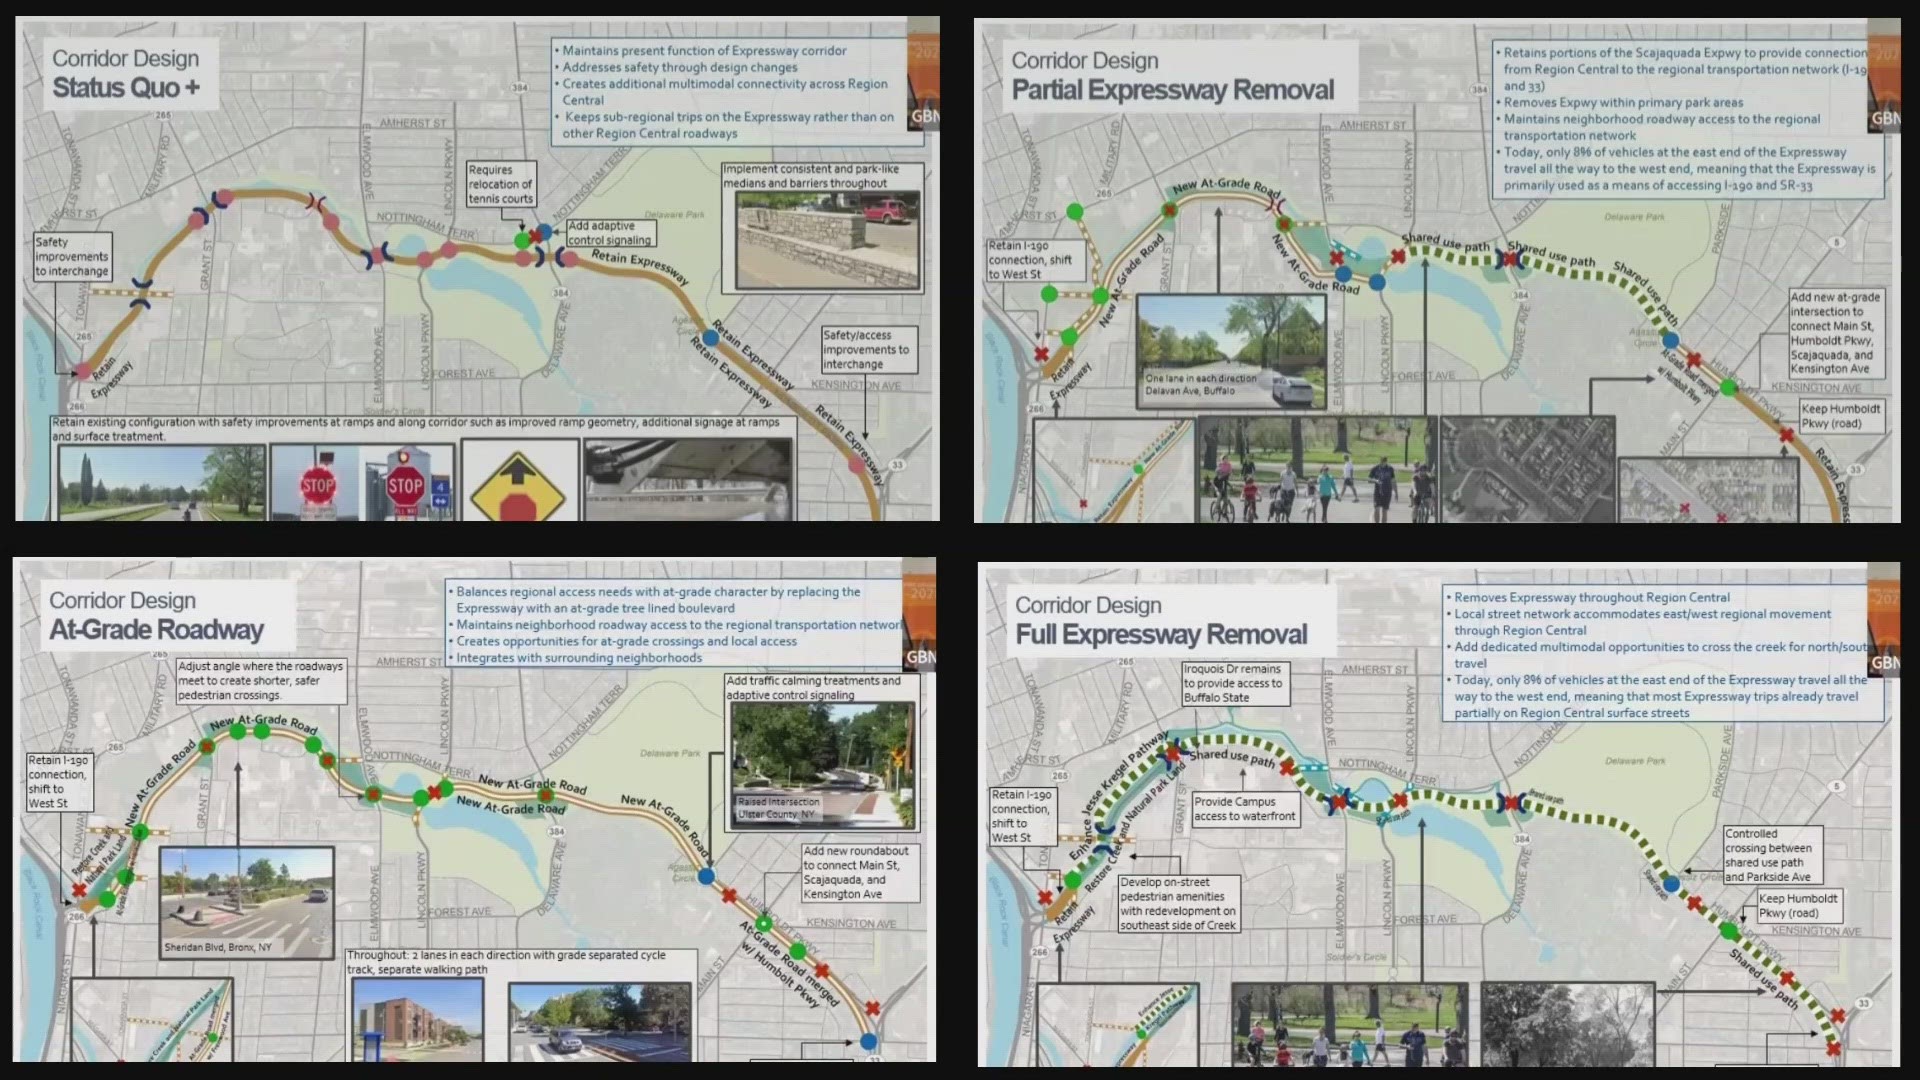 Governor unveils plans for Phase 2 study for the Kensington Expressway